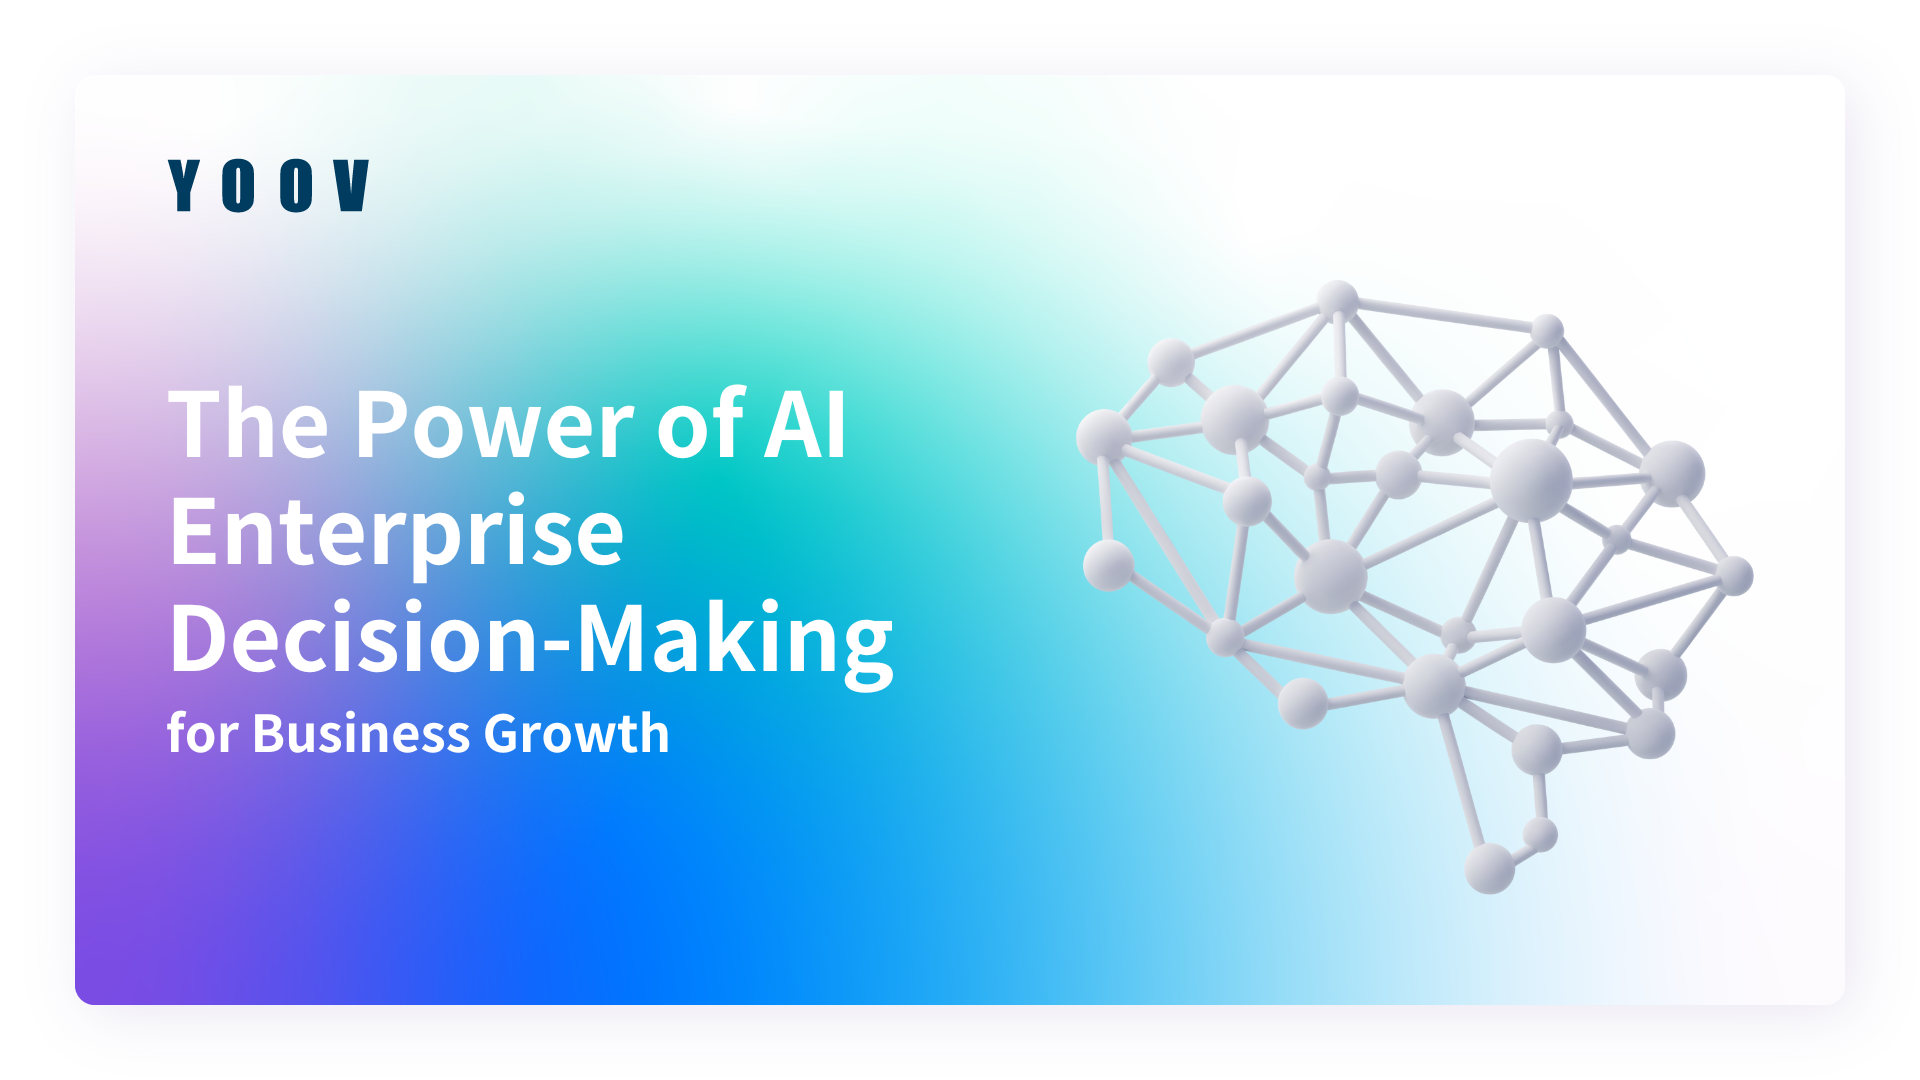 The Power of AI Enterprise Decision-Making for Business Growth